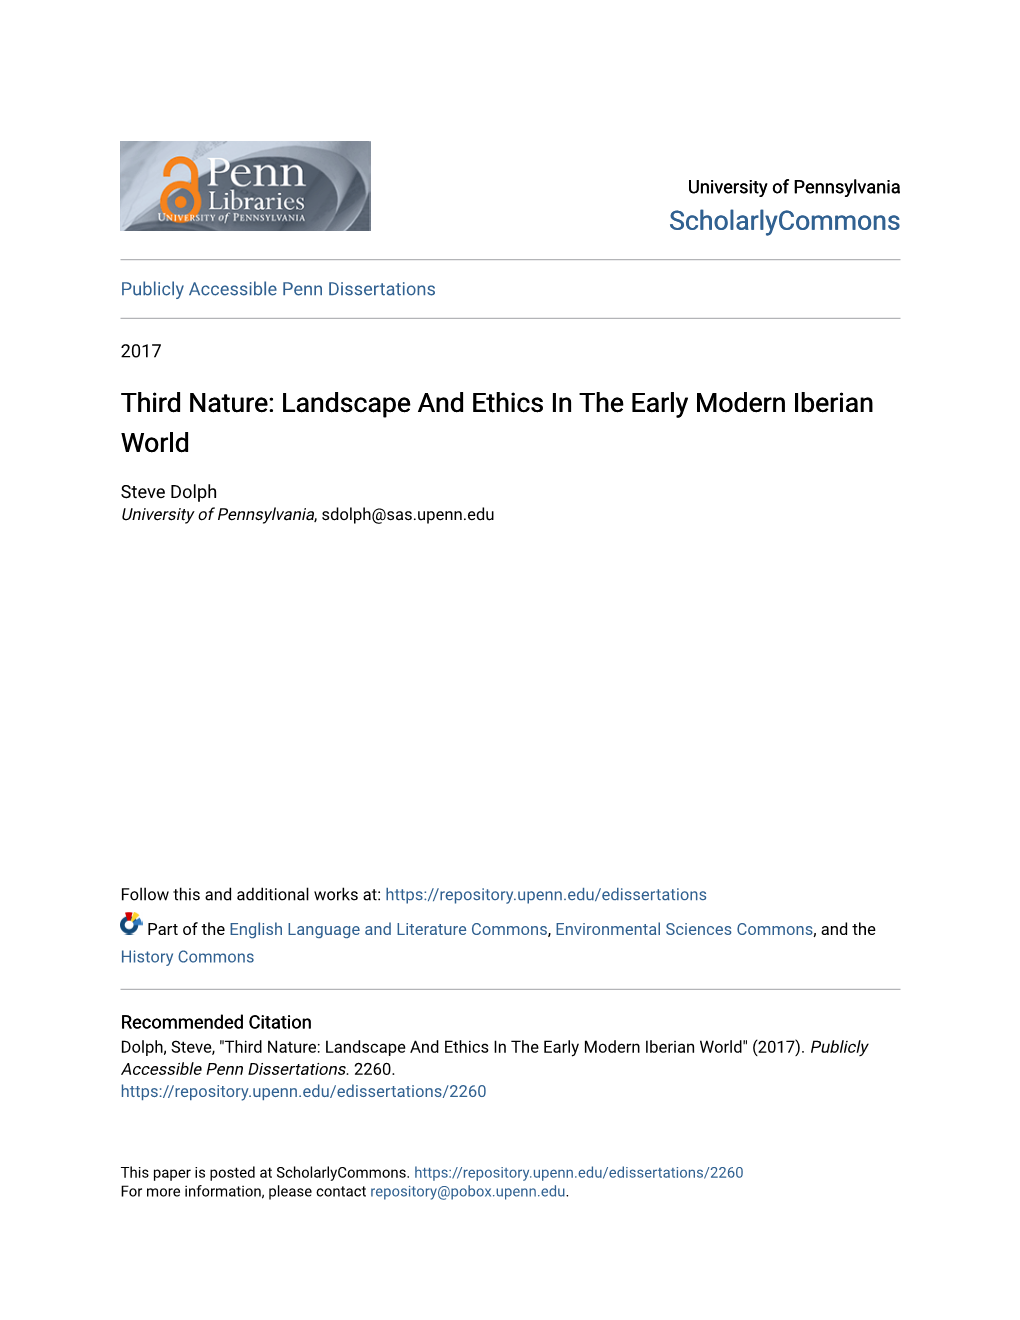 Third Nature: Landscape and Ethics in the Early Modern Iberian World